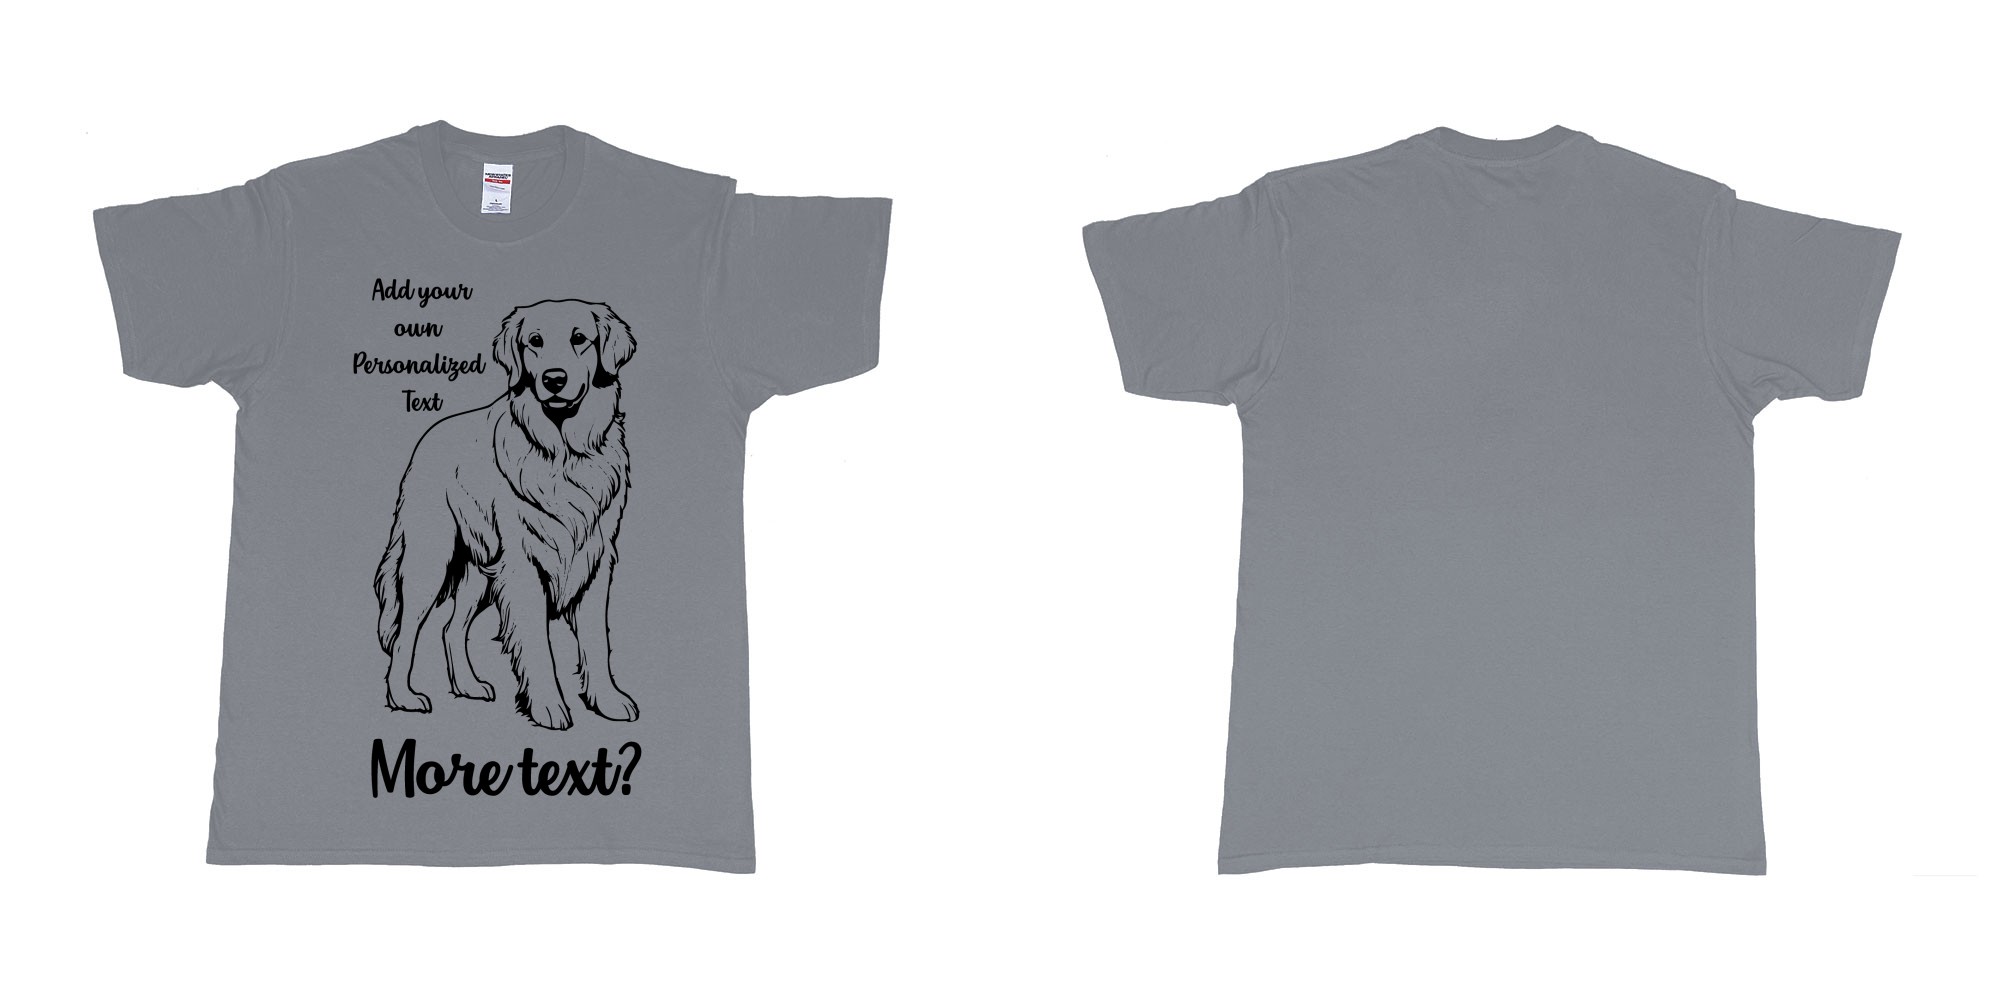 Custom tshirt design golden retriever dog breed personalized text in fabric color misty choice your own text made in Bali by The Pirate Way